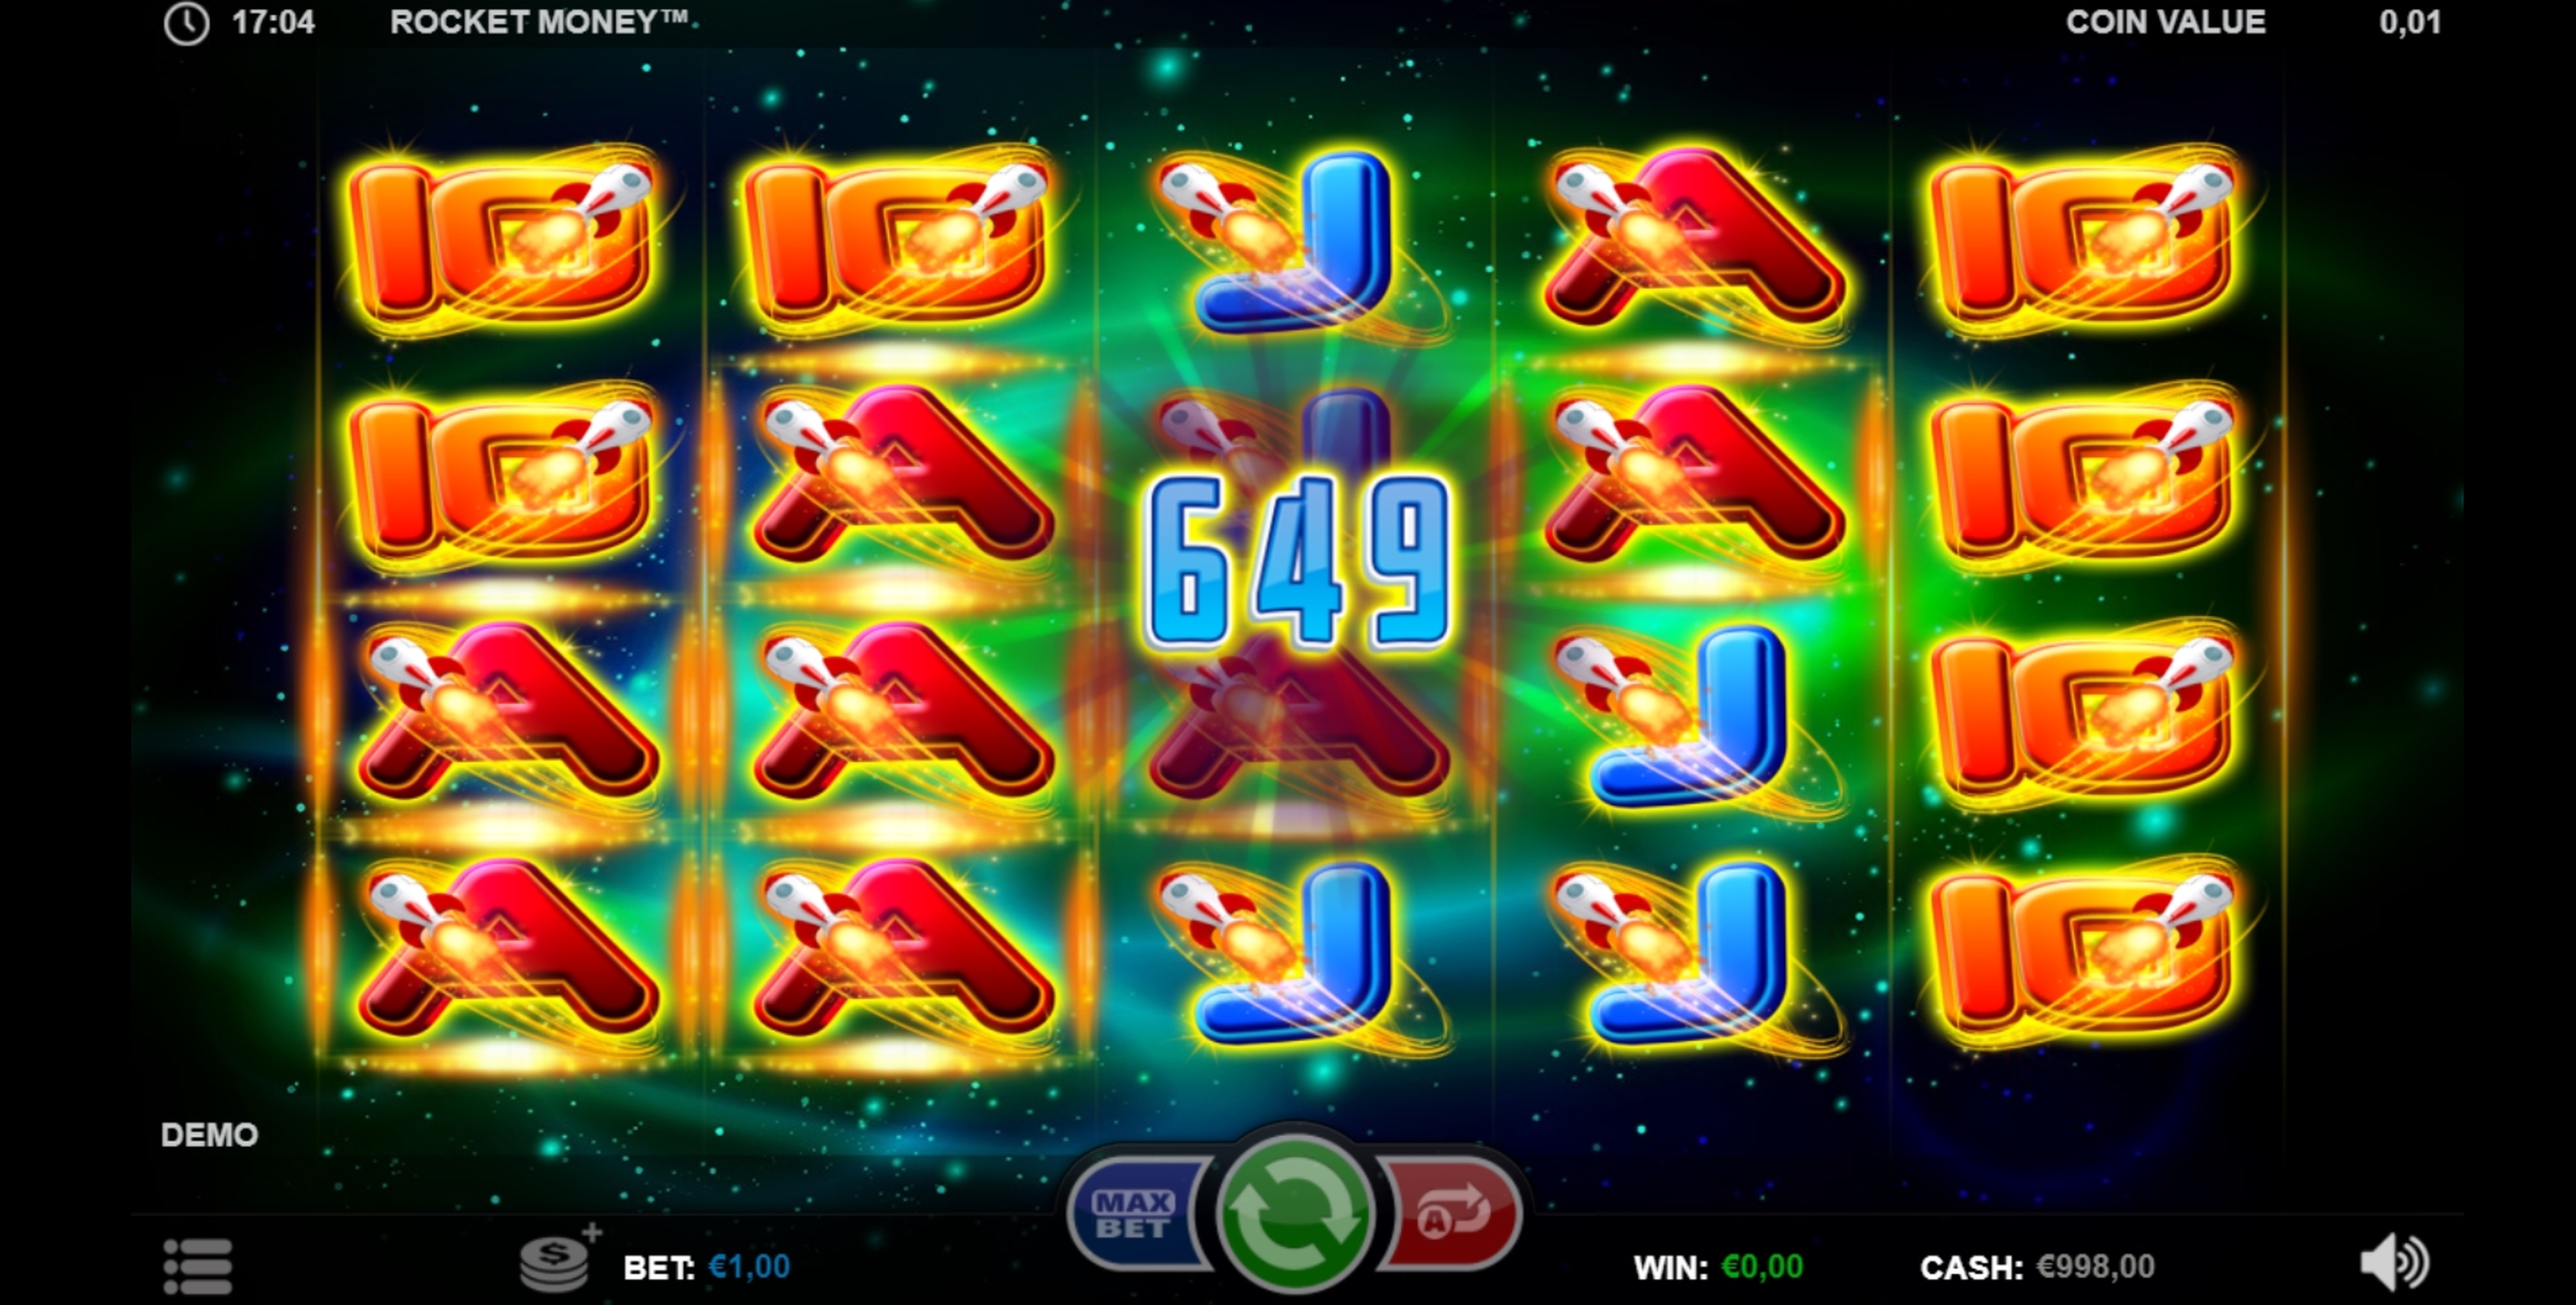 Win Money in Rocket Money Free Slot Game by Betsson Group